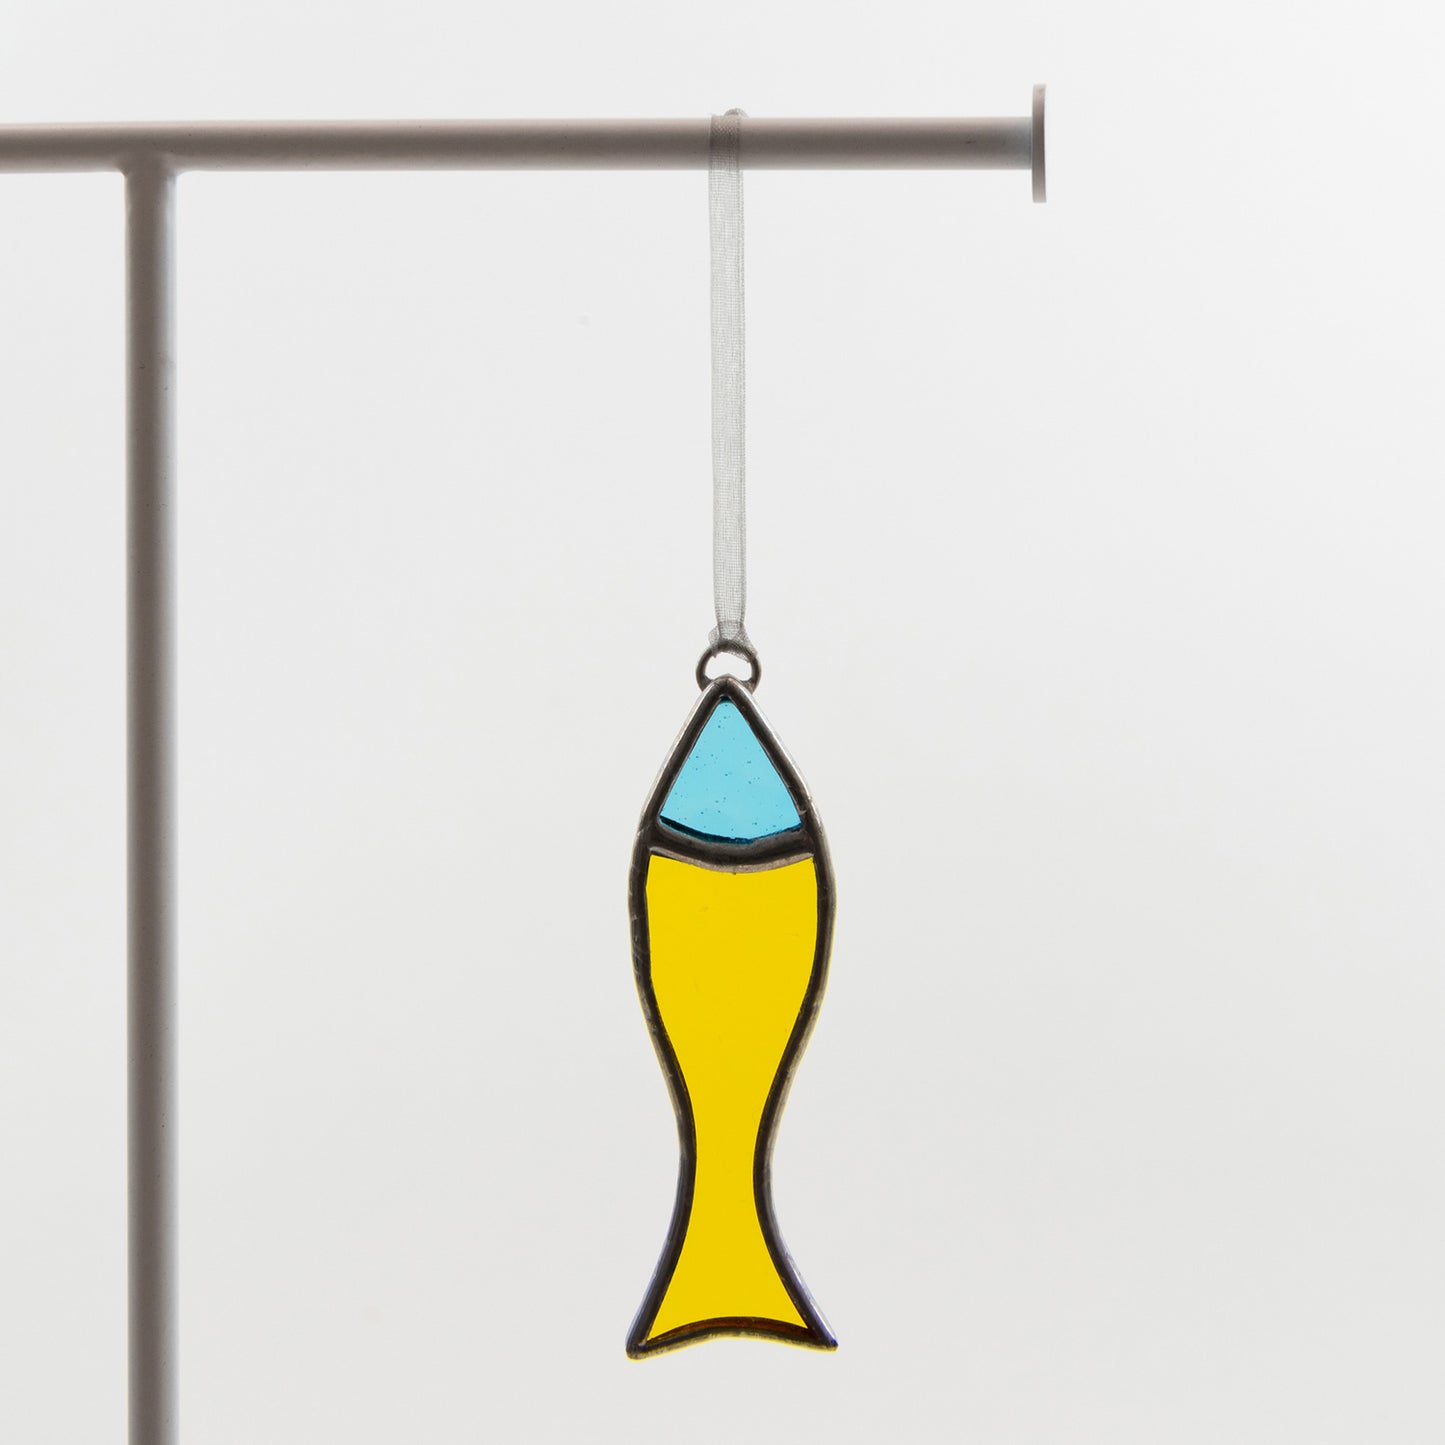 A stained glass effect fish decoration with ribbon to hang the decoration from. This fish was made using yellow and blue glass.